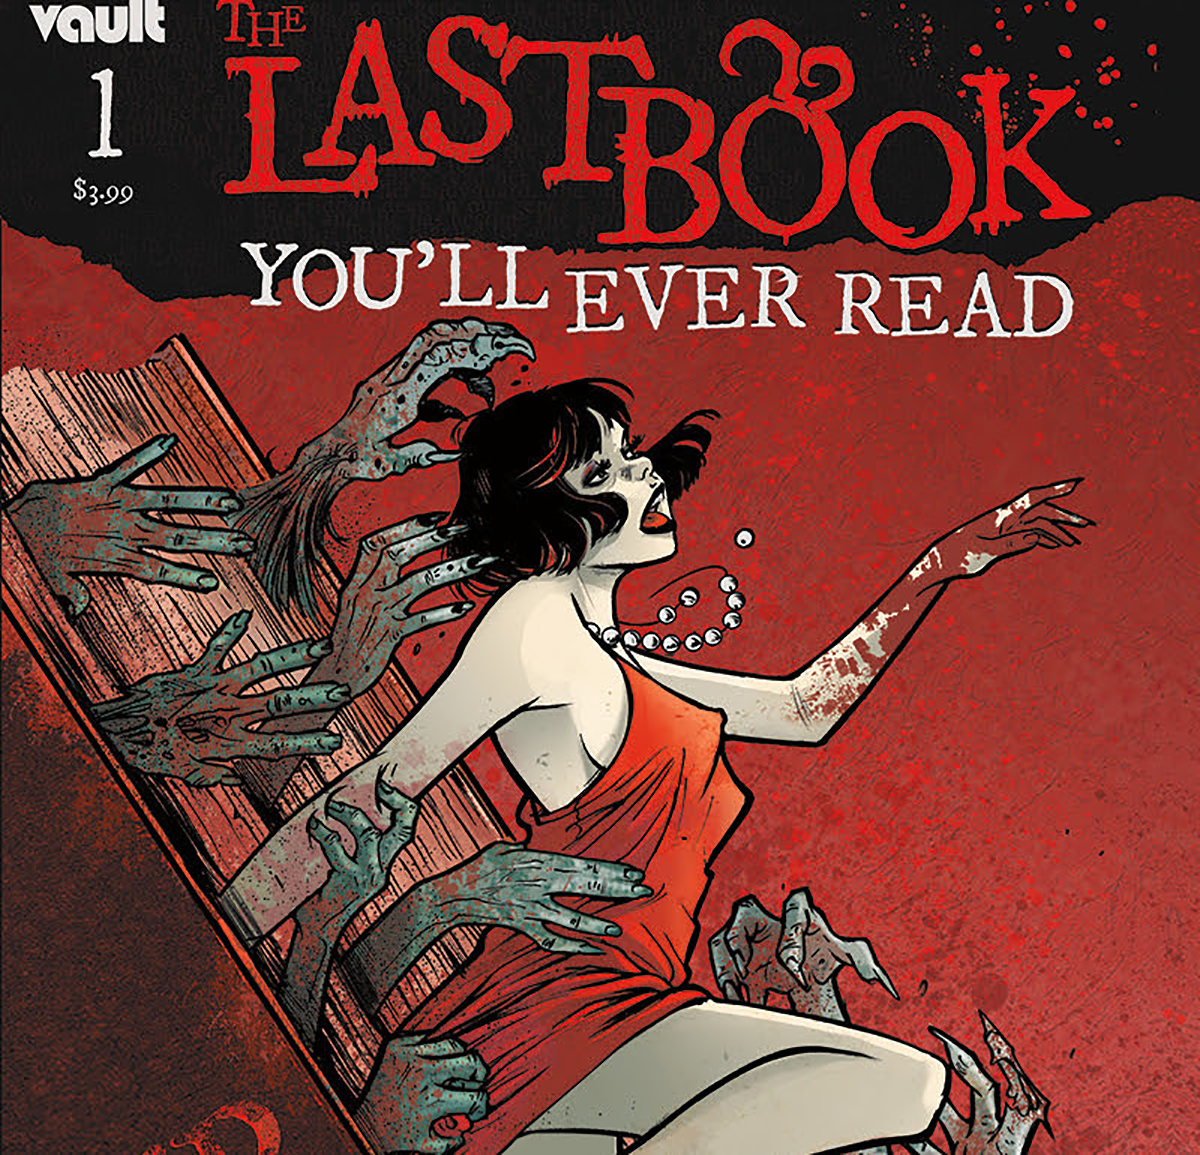 'The Last Book You'll Ever Read' #1 draws you into its horror world